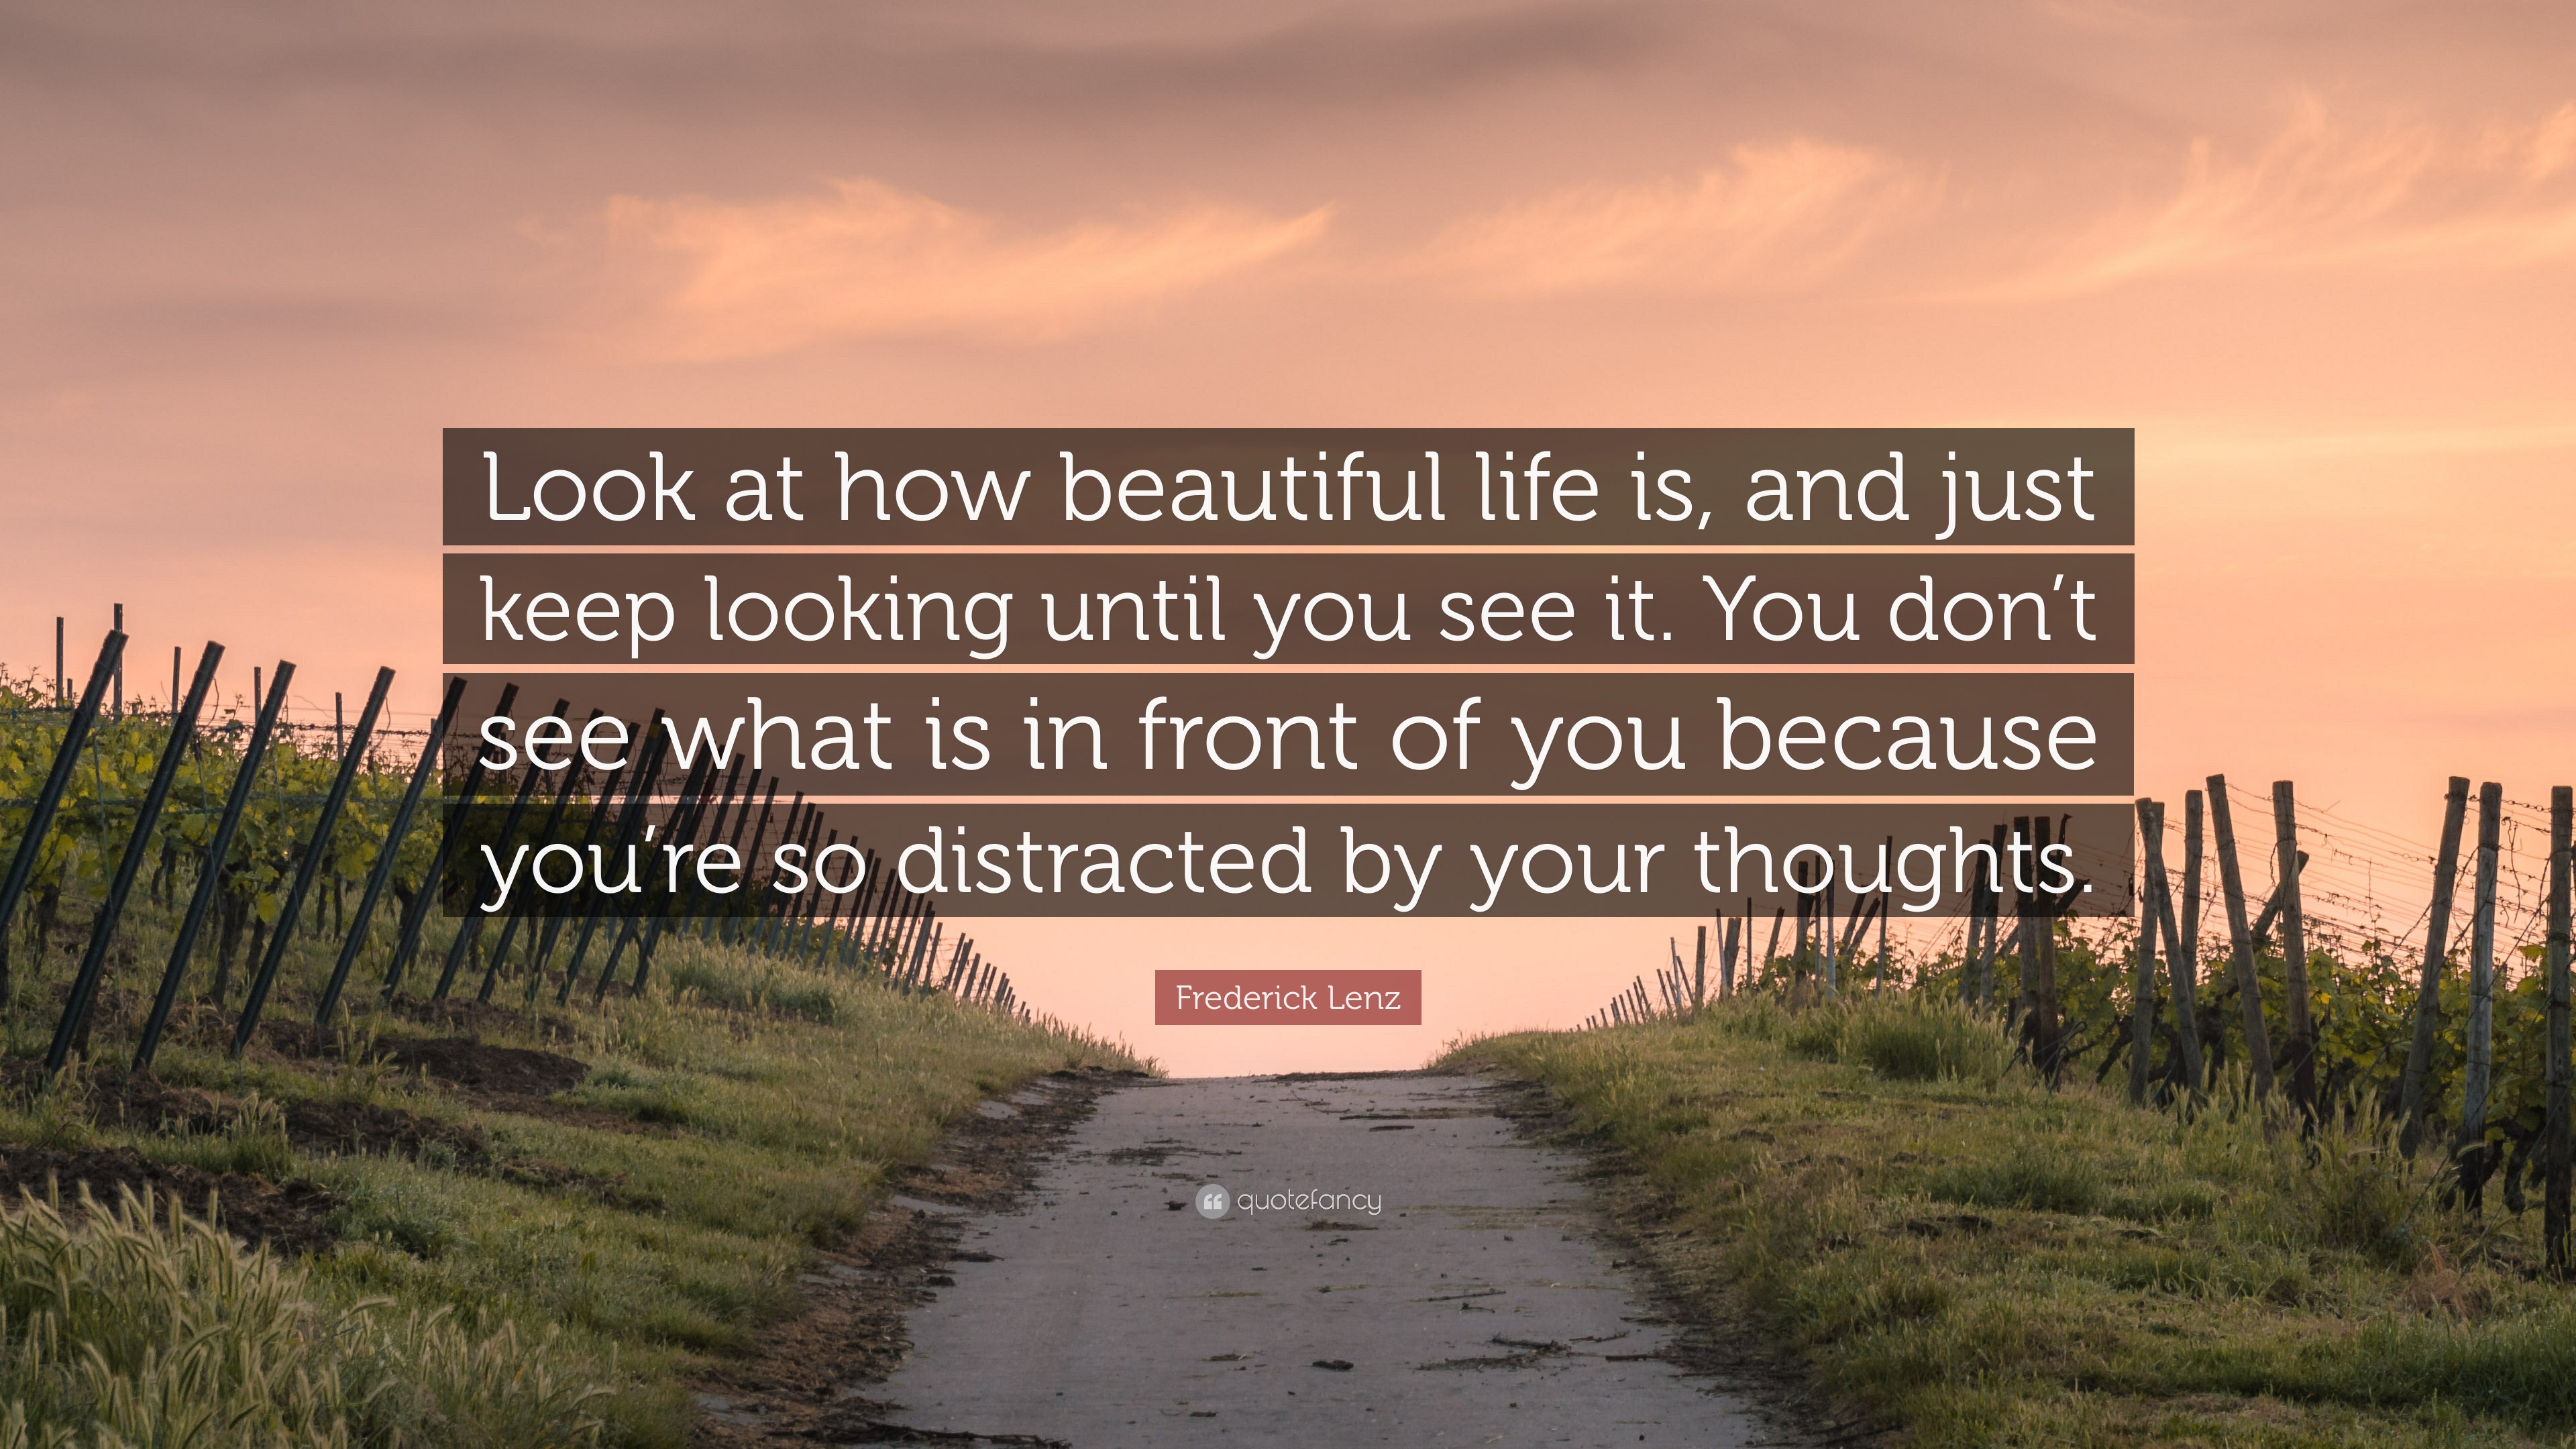 your beautiful life quotes frederick lenz quote u201clook at how beautiful life is and just